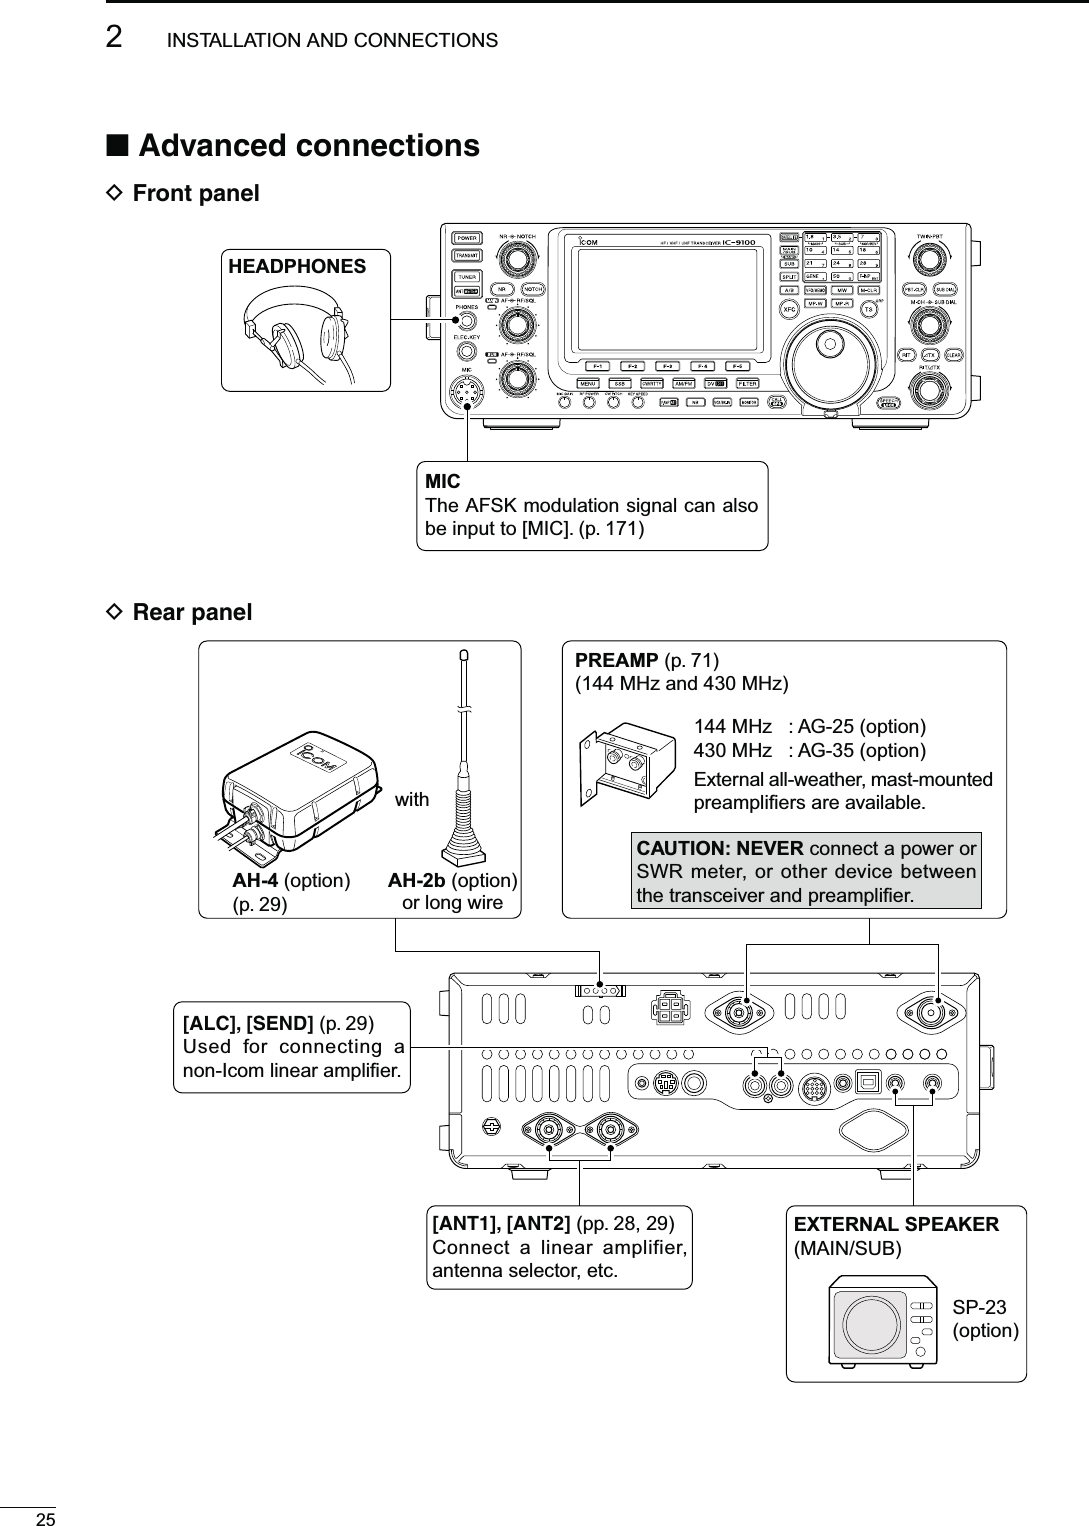 D2EARPANEL252INSTALLATION AND CONNECTIONSN!DVANCEDCONNECTIONSD&amp;RONTPANELHEADPHONESMICThe AFSK modulation signal can also be input to [MIC]. (p. 171)AH-4 (option)(p. 29)AH-2b (option)or long wirewithPREAMP (p. 71)(144 MHz and 430 MHz)144 MHz : AG-25 (option)430 MHz : AG-35 (option)External all-weather, mast-mounted preampliﬁers are available.CAUTION: NEVER connect a power or SWR meter, or other device between the transceiver and preampliﬁer.;!,#=;3%.$= (p. 29)Used for connecting a non-Icom linear ampliﬁer.;!.4=;!.4= (pp. 28, 29)Connect a linear amplifier, antenna selector, etc.EXTERNAL SPEAKER(MAIN/SUB)SP-23(option)